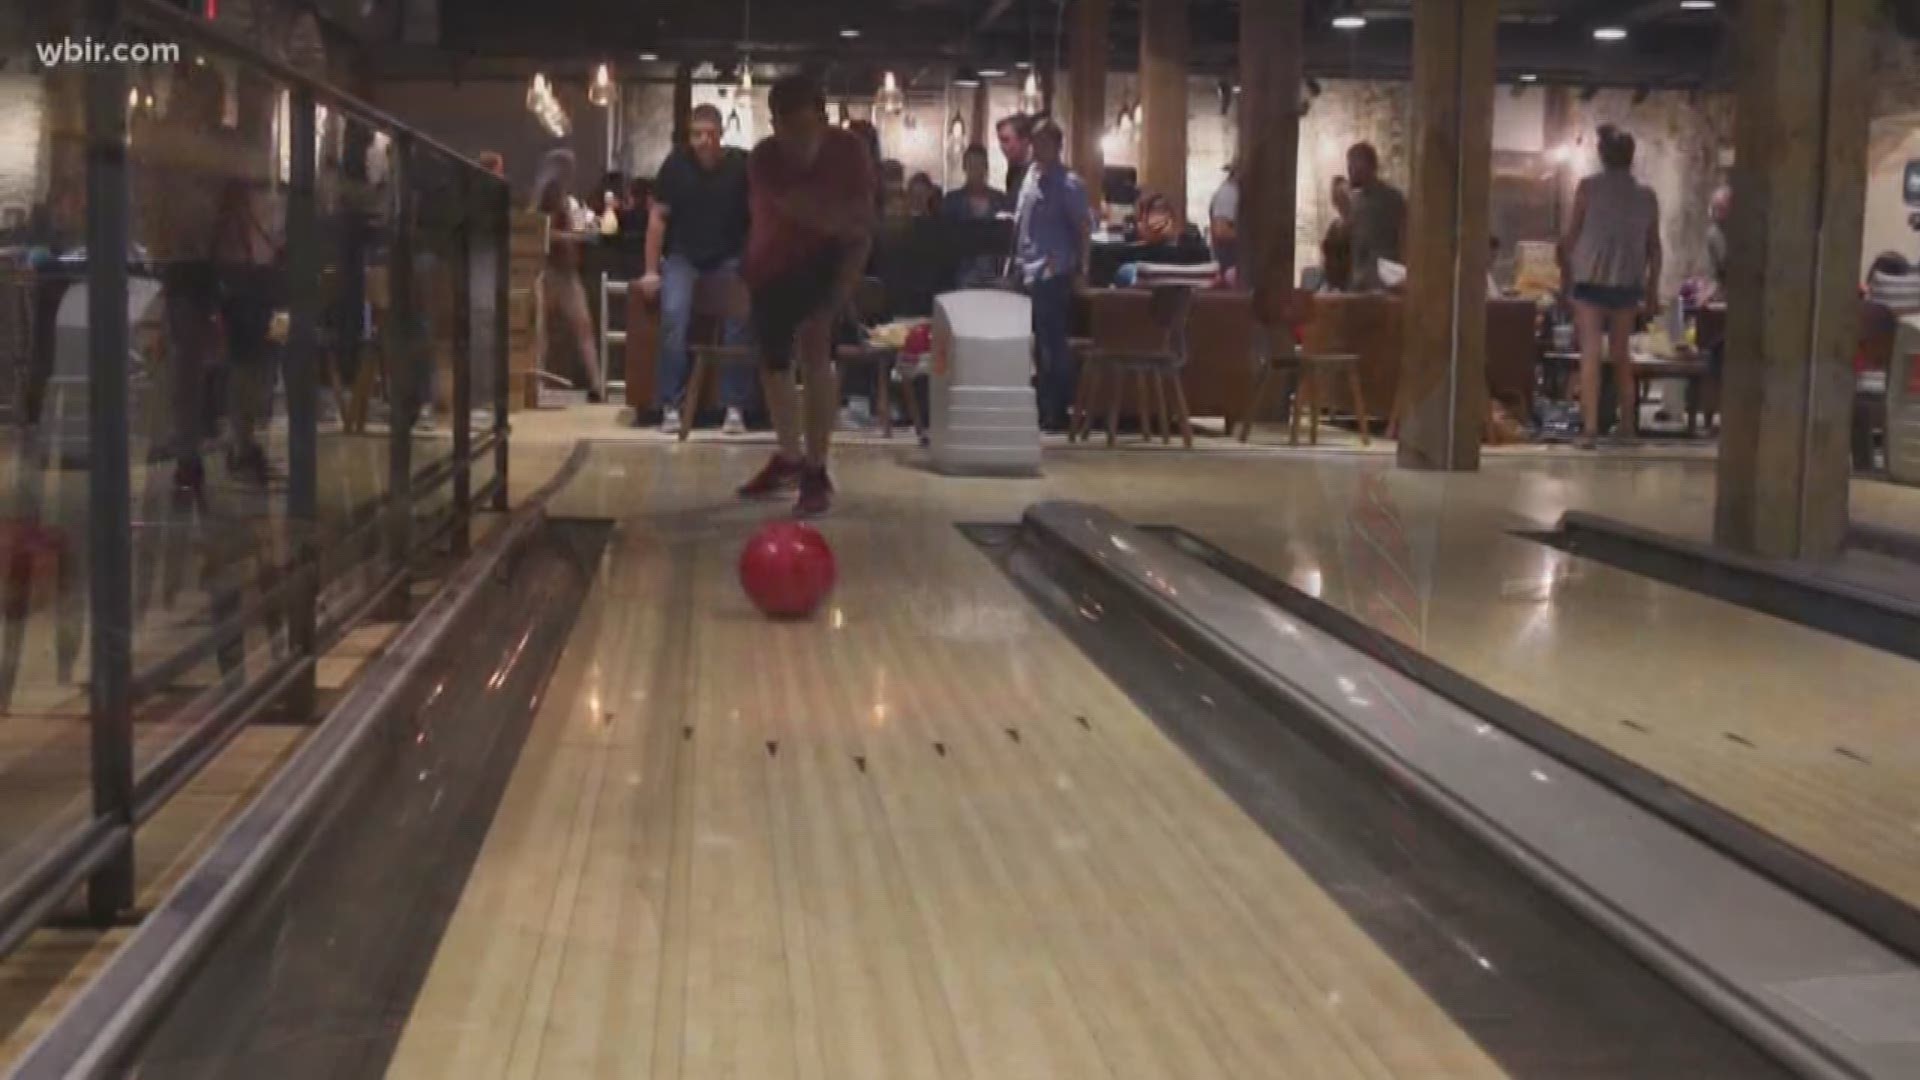 If you need a family activity, you have a chance to bowl for free. Next week, Maple Hall will celebrate three years in downtown Knoxville by offering guests one hour of free bowling.